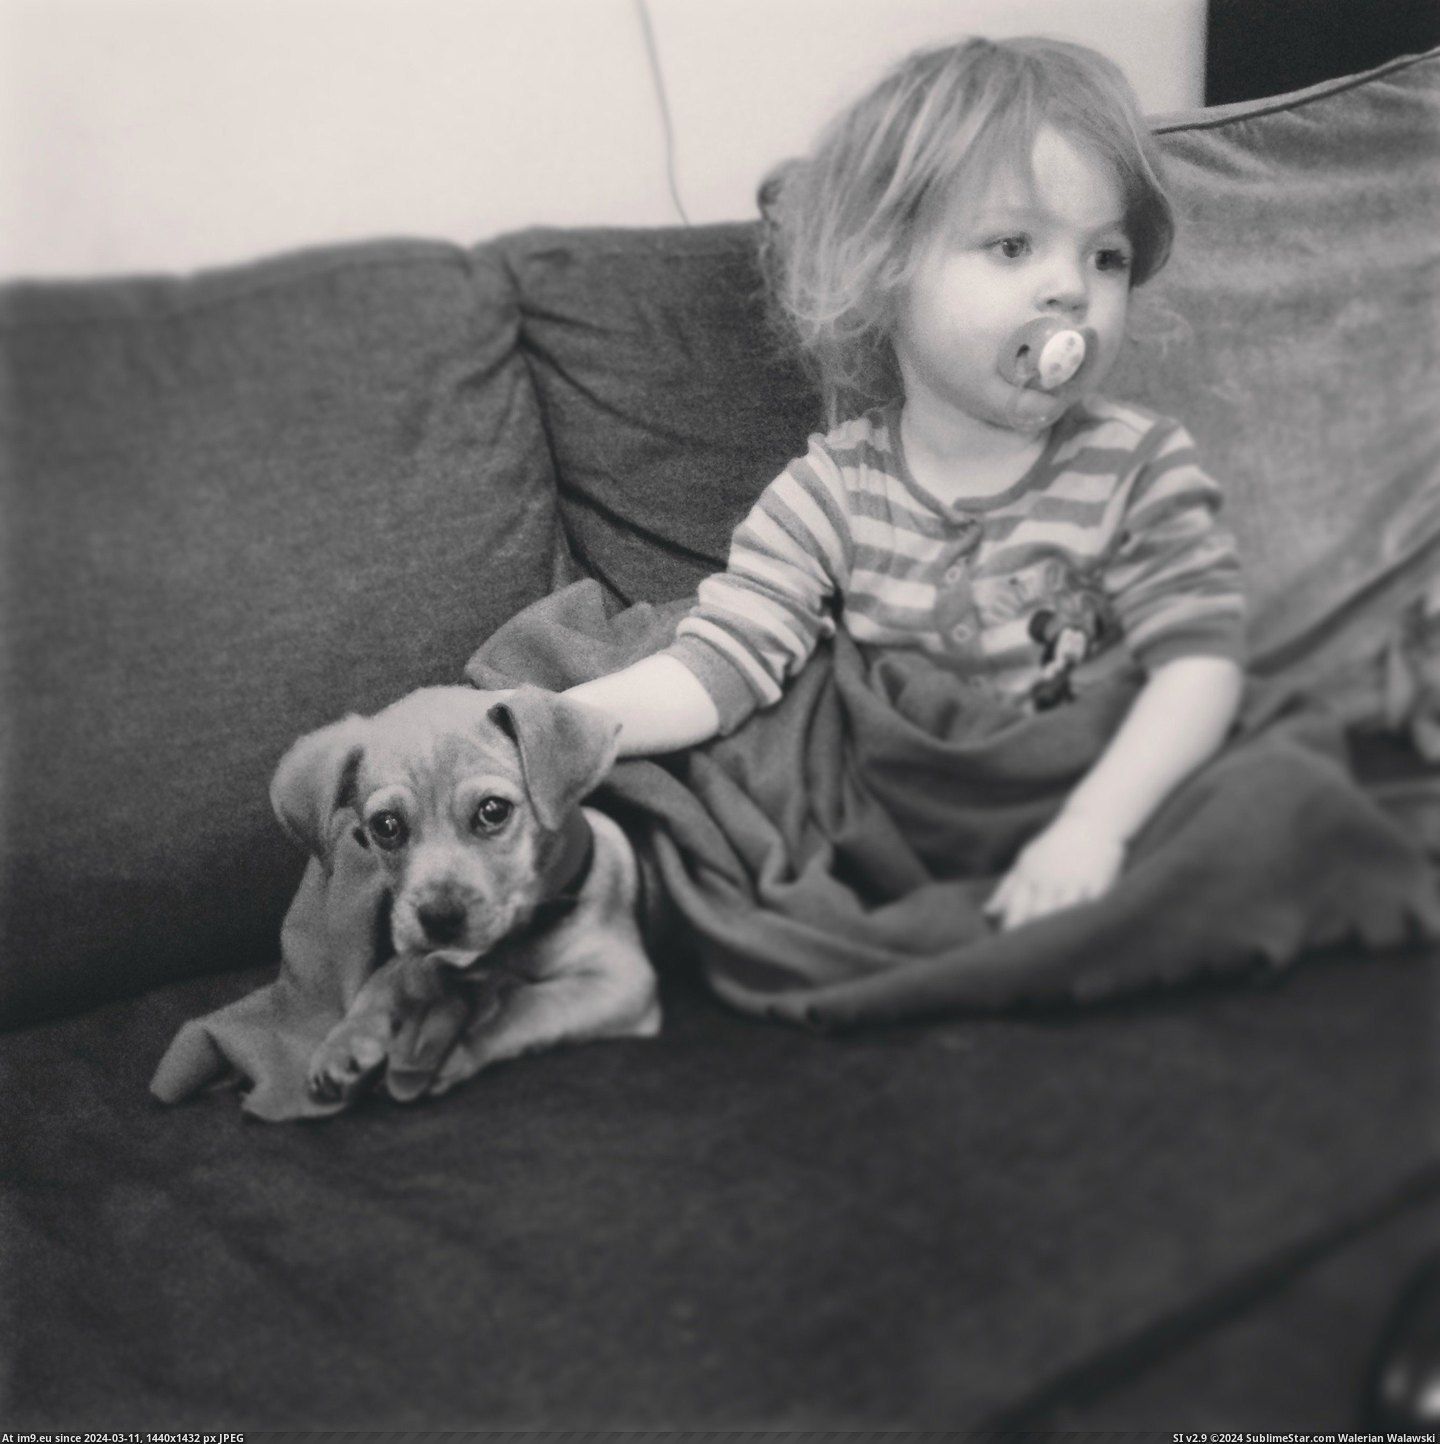 #Thought #Meet #Mad #Mollie #Puggle #Jack #Pup #Toddler [Aww] Everyone thought I was mad getting a puggle pup when I have a toddler already.... everyone meet Mollie and Jack. 1 Pic. (Bild von album My r/AWW favs))